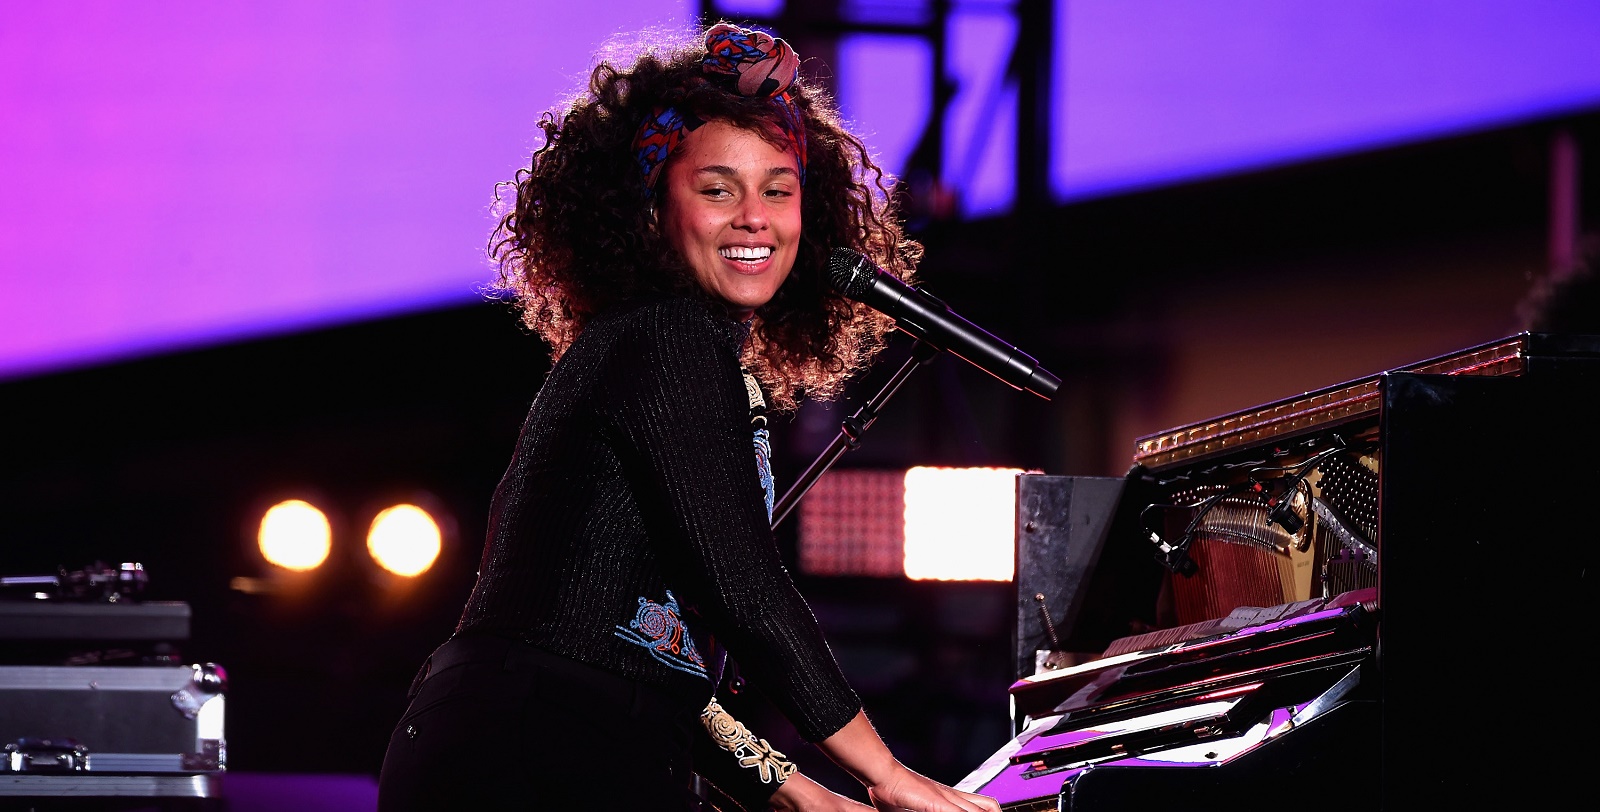 Alicia keys smiling and playing piano while on the stage